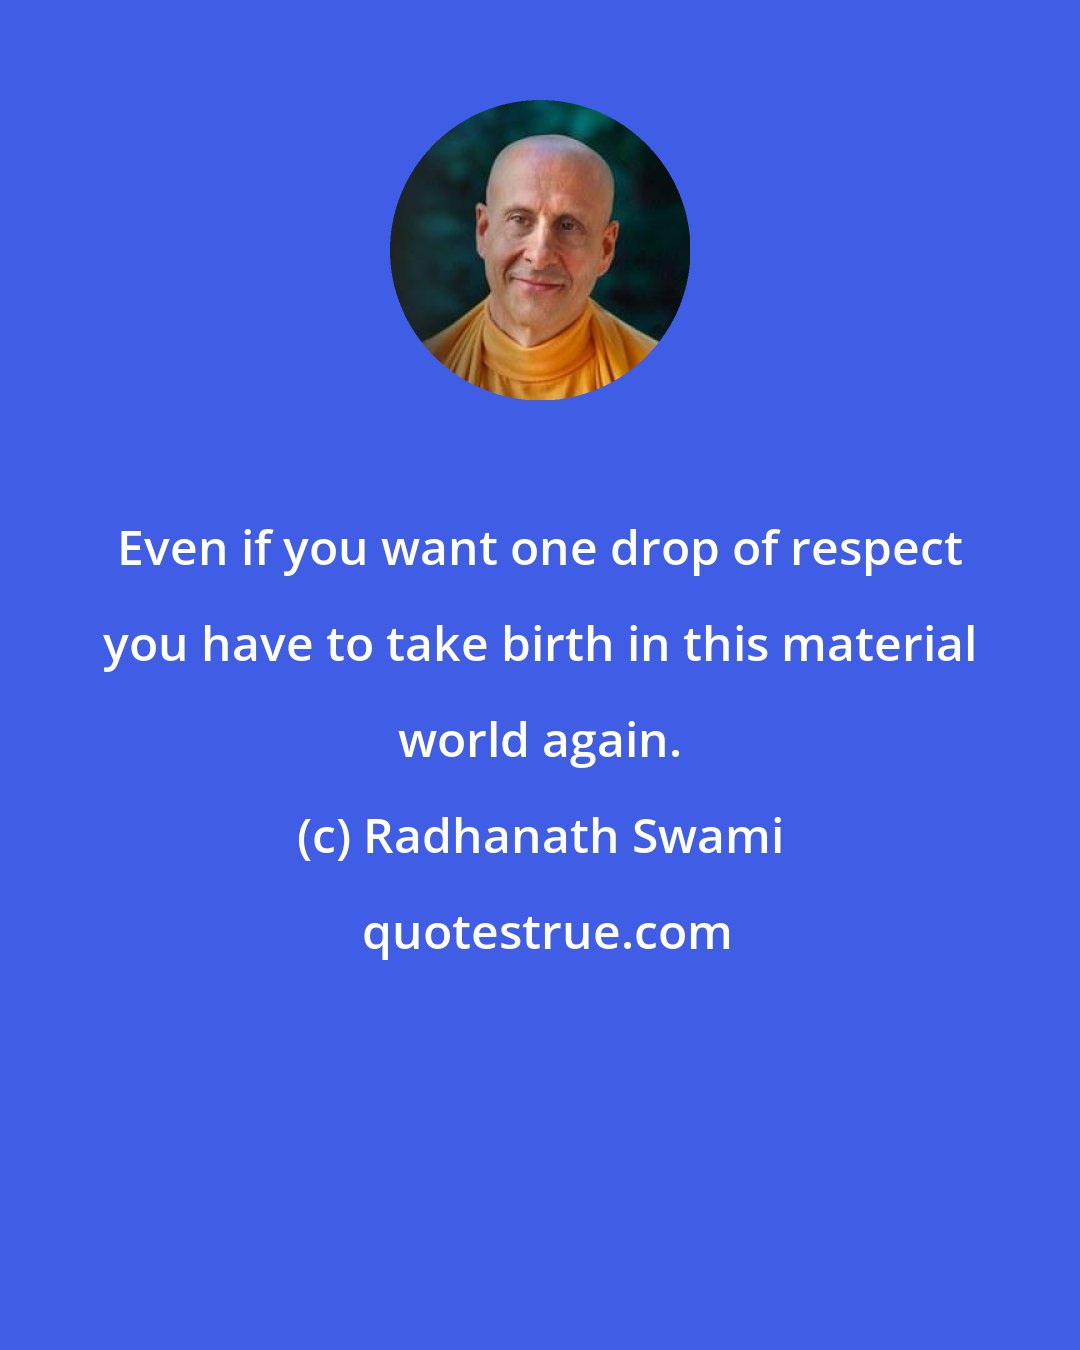 Radhanath Swami: Even if you want one drop of respect you have to take birth in this material world again.